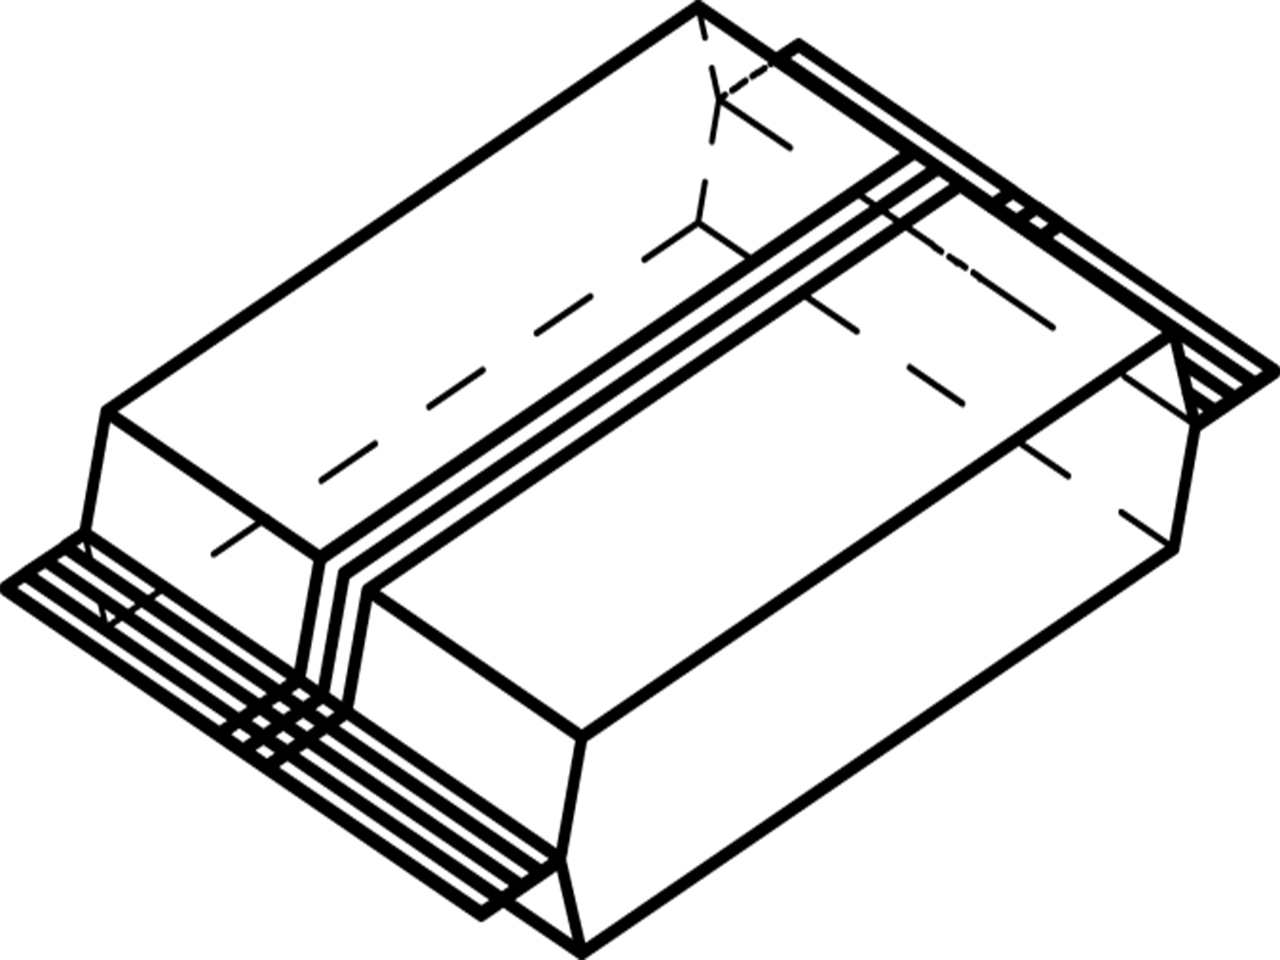 Illustration of the packaging type "Flowpack with longitudinal seam above/below"t